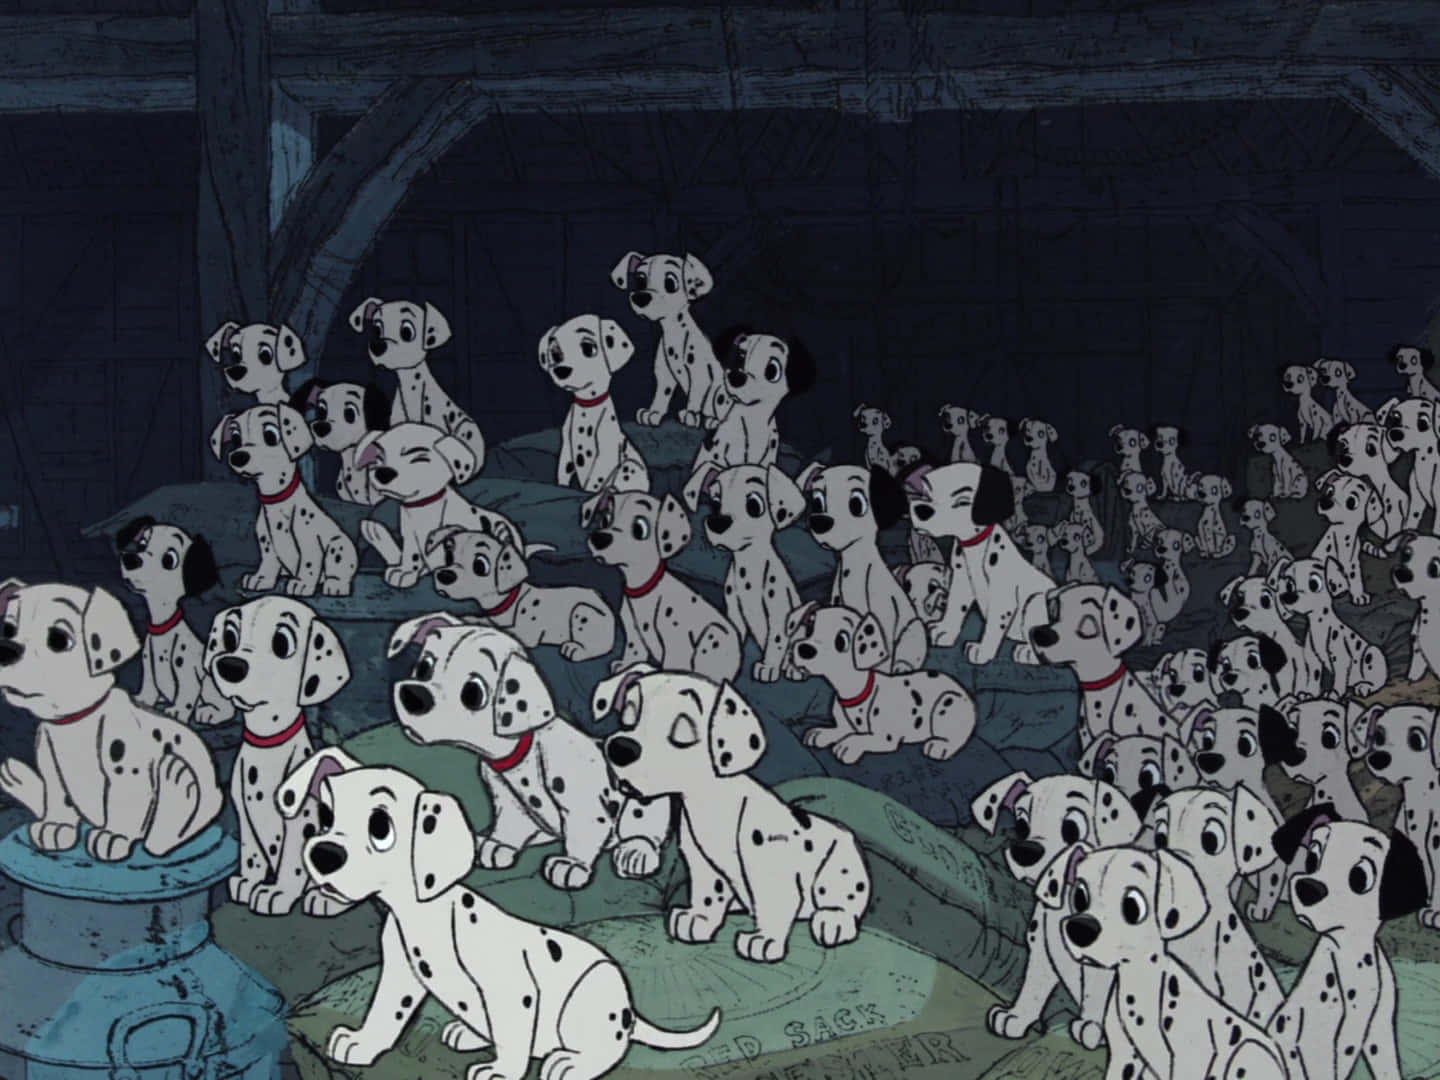 A Group Of Dalmatian Dogs In A Room